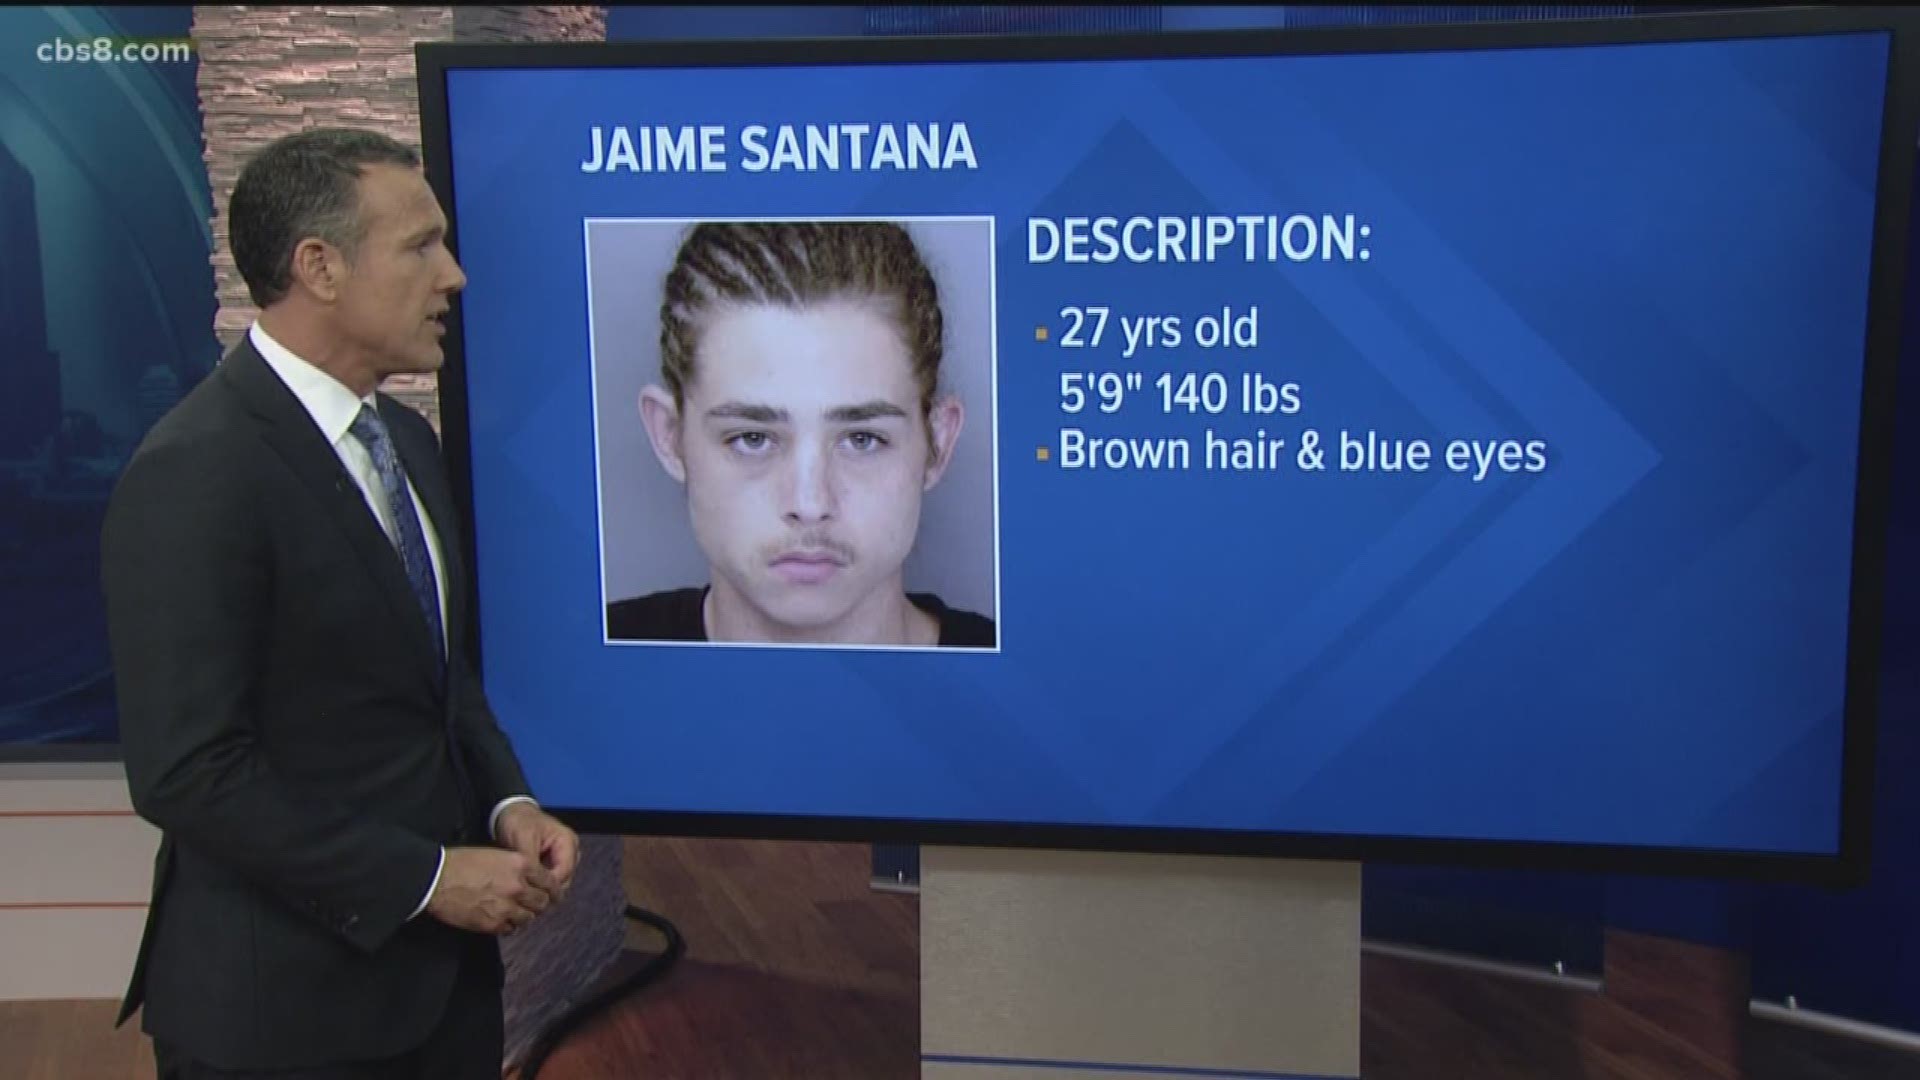 Jaime Santana is a local fugitive with an outstanding warrant for failing to register as a sex offender.